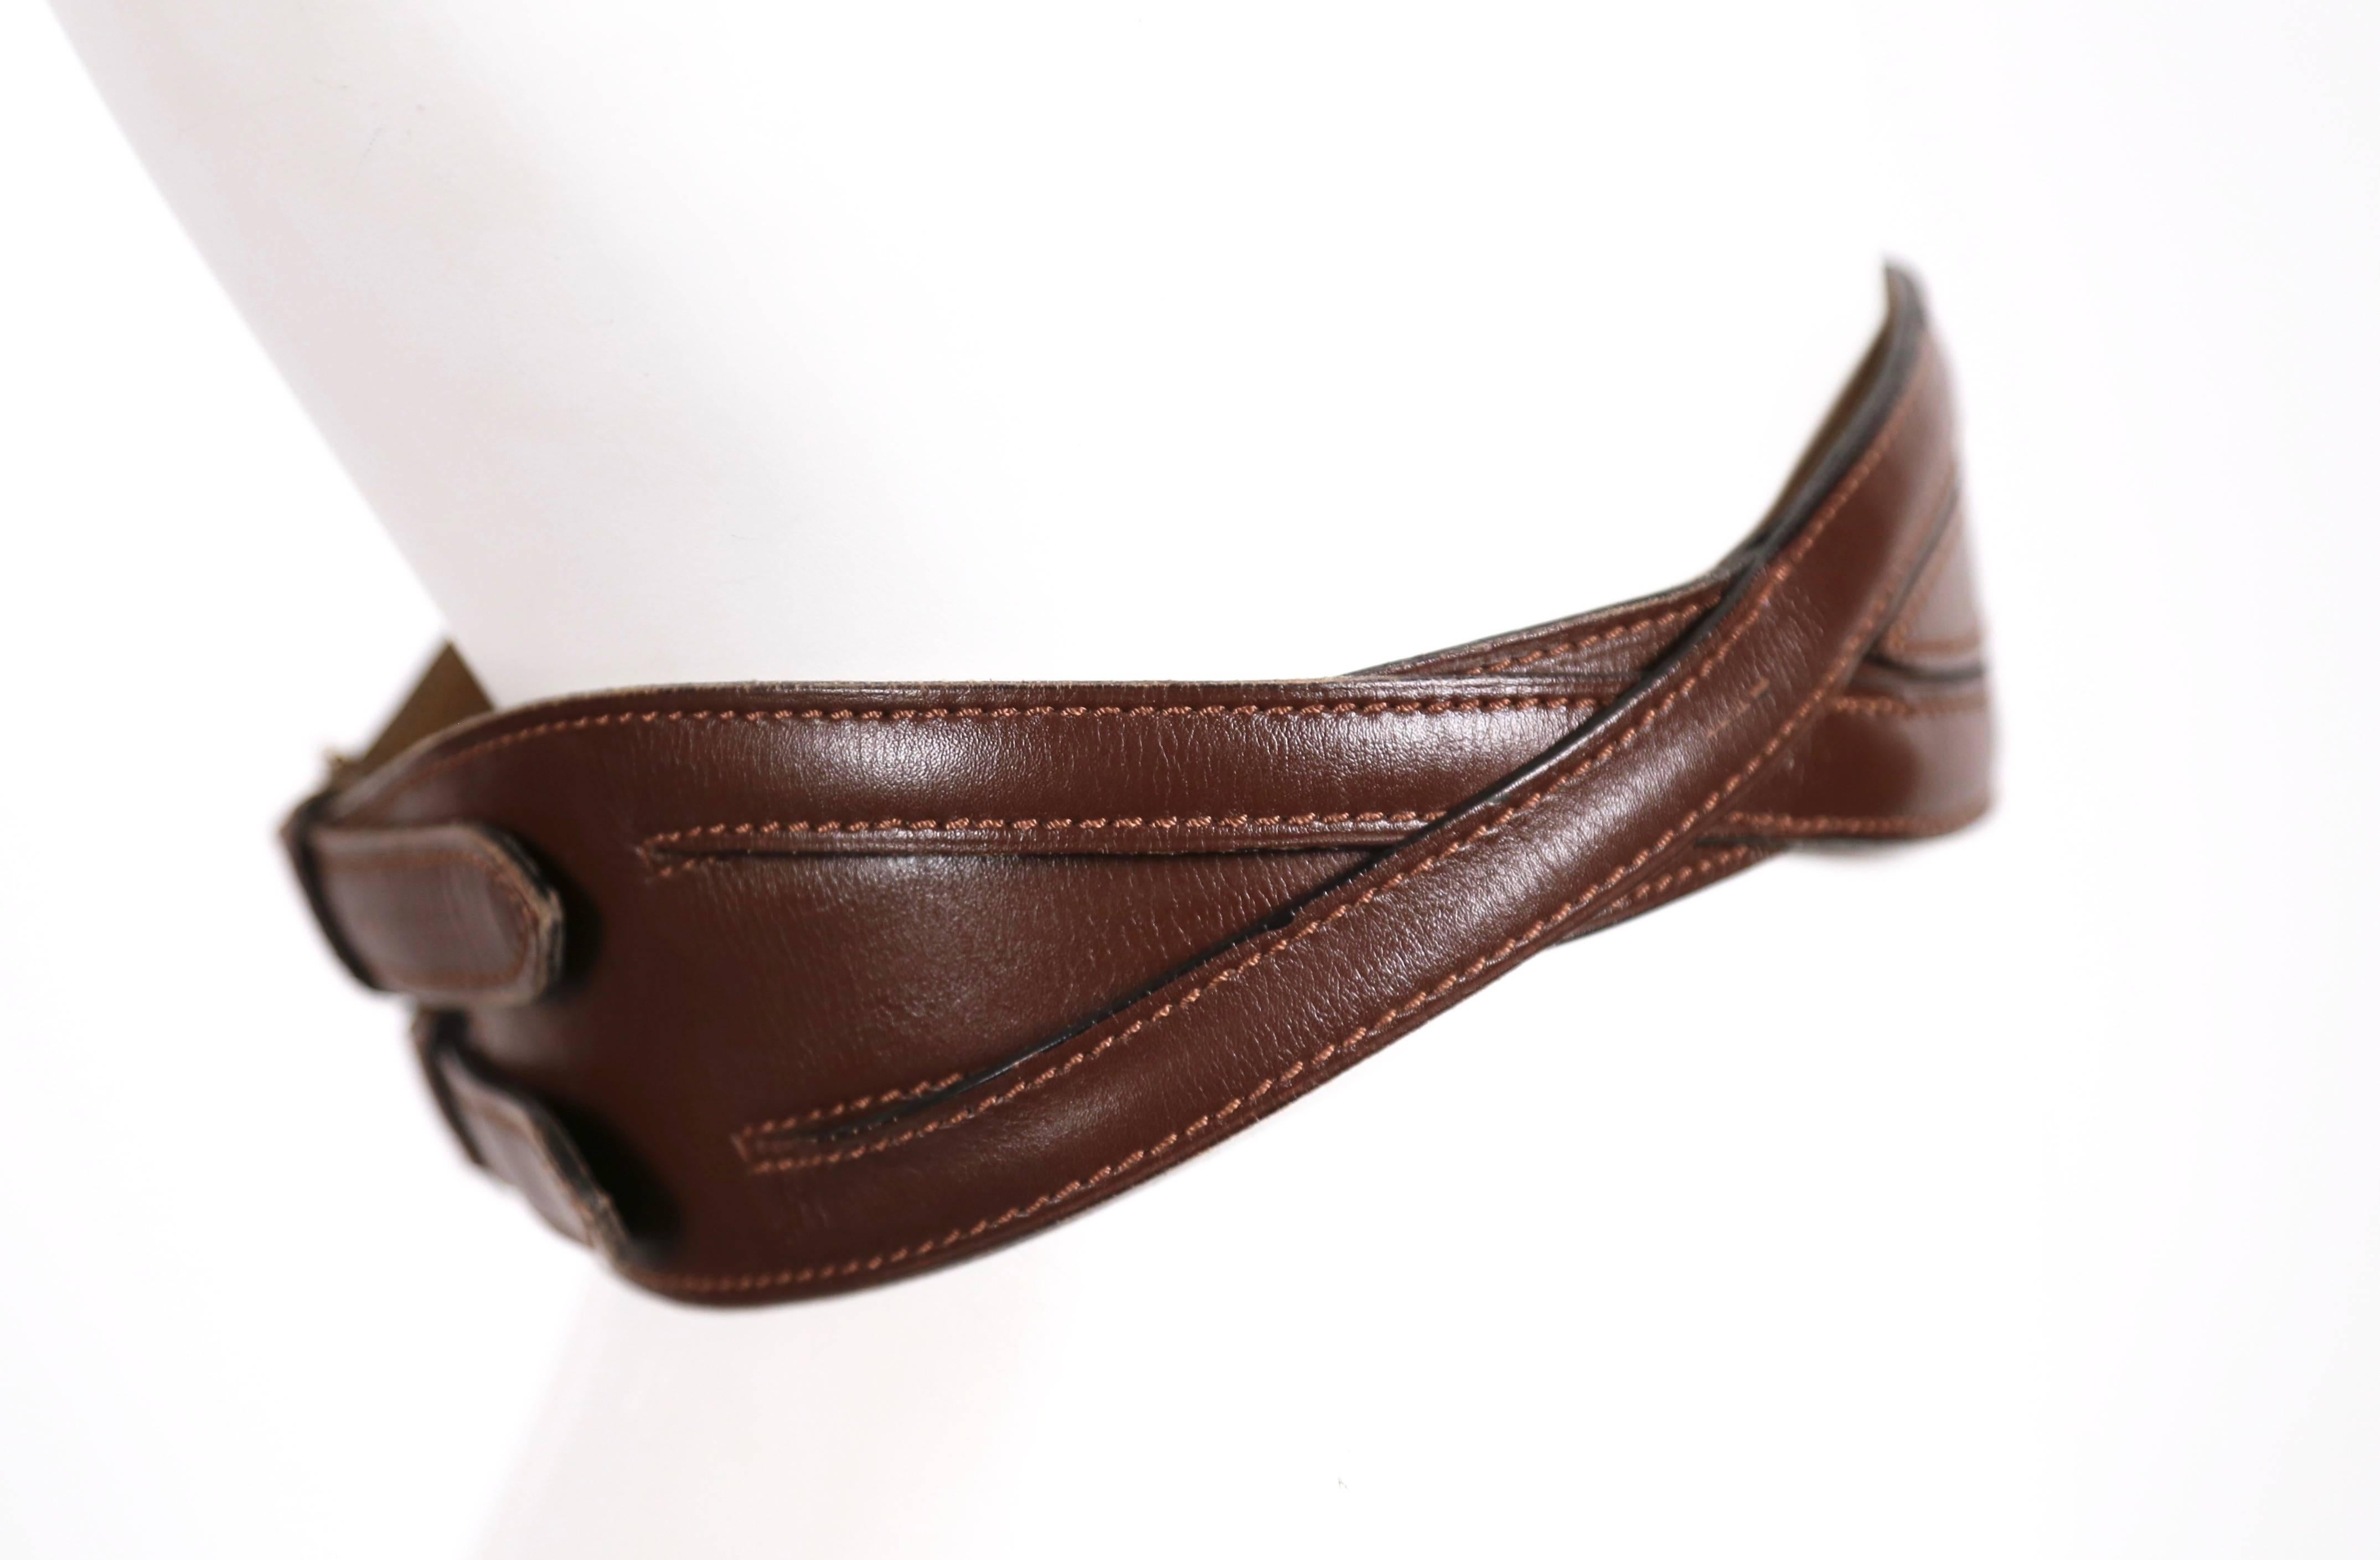 Rich brown leather belt with brass hardware designed by Azzedine Alaia dating to fall of 1990. Labeled a French size 70. Fits a 24-26